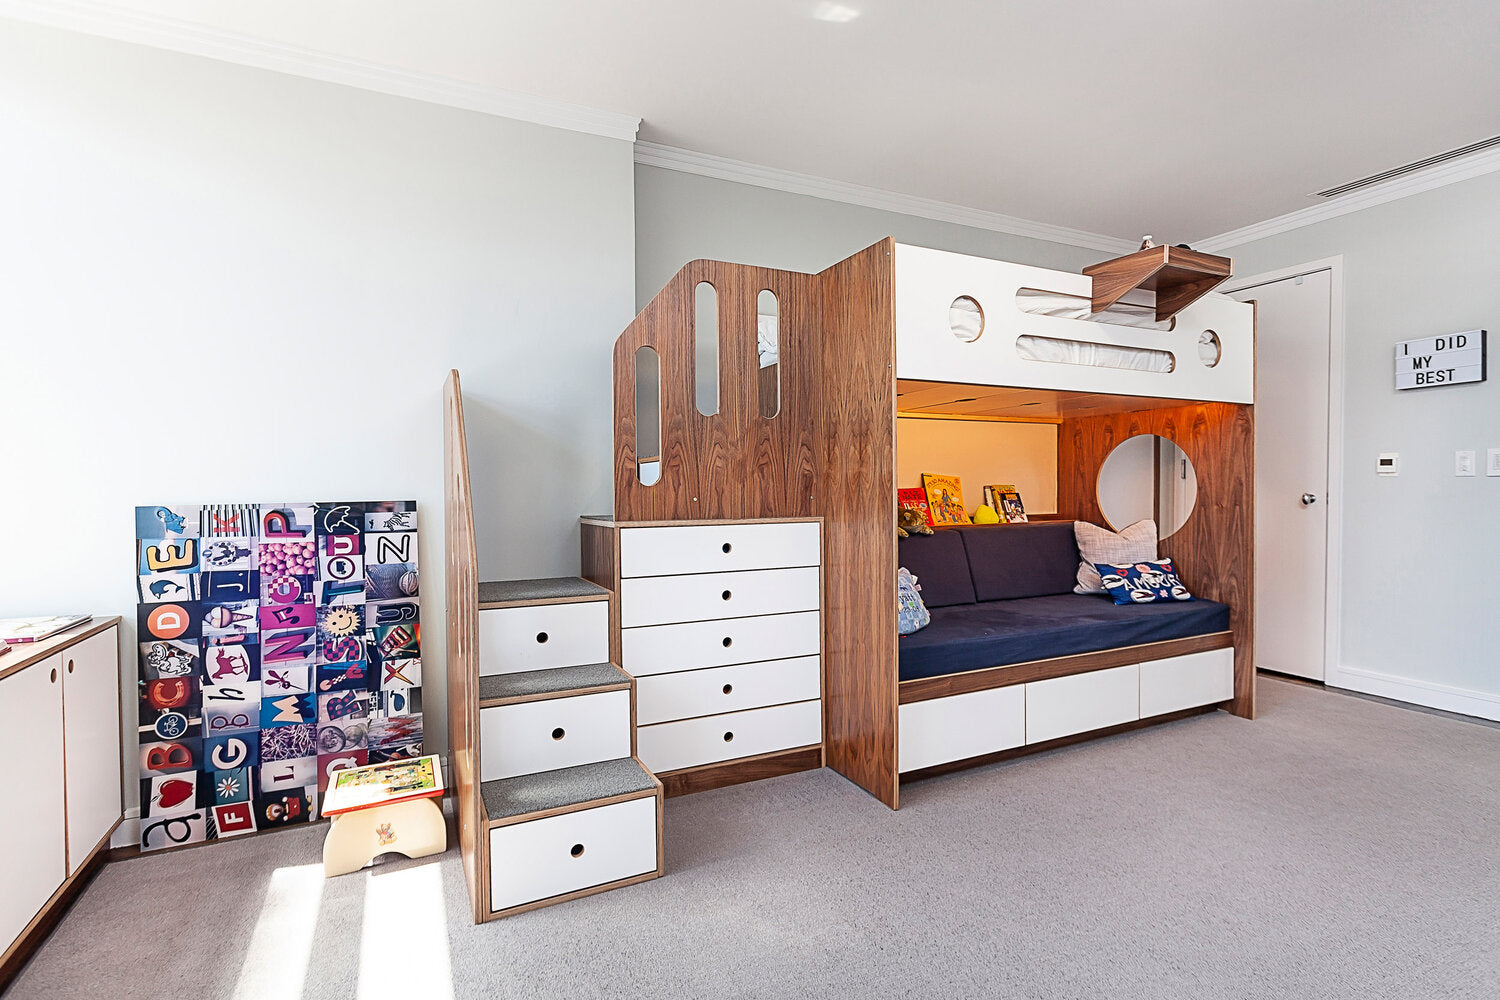 Modern kids’ room with bunk bed, built-in shelves, and skateboard deck wall art.